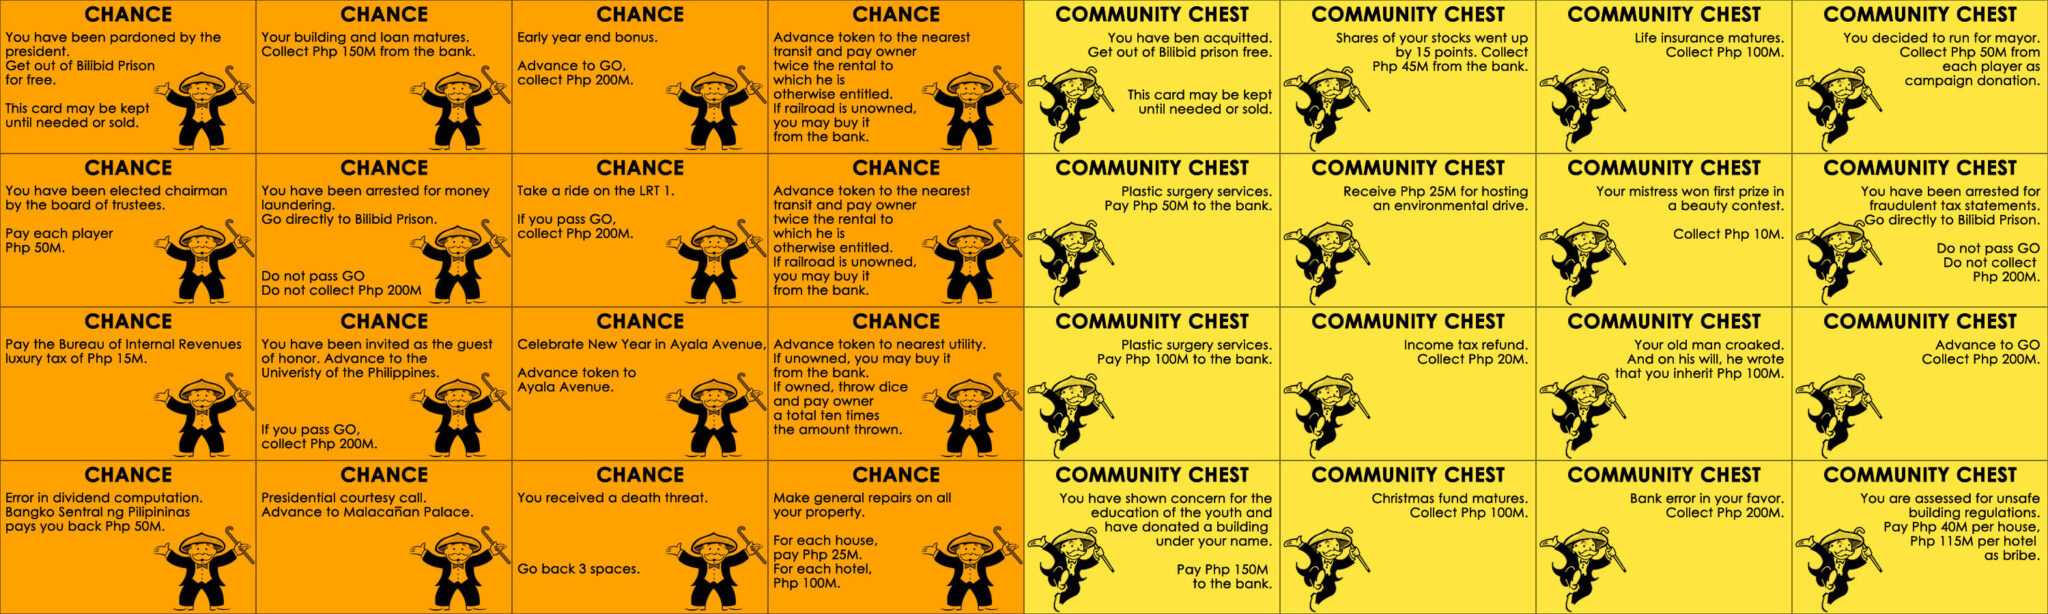 15 Best Photos Of Print Monopoly Chance Cards Monopoly Within Chance